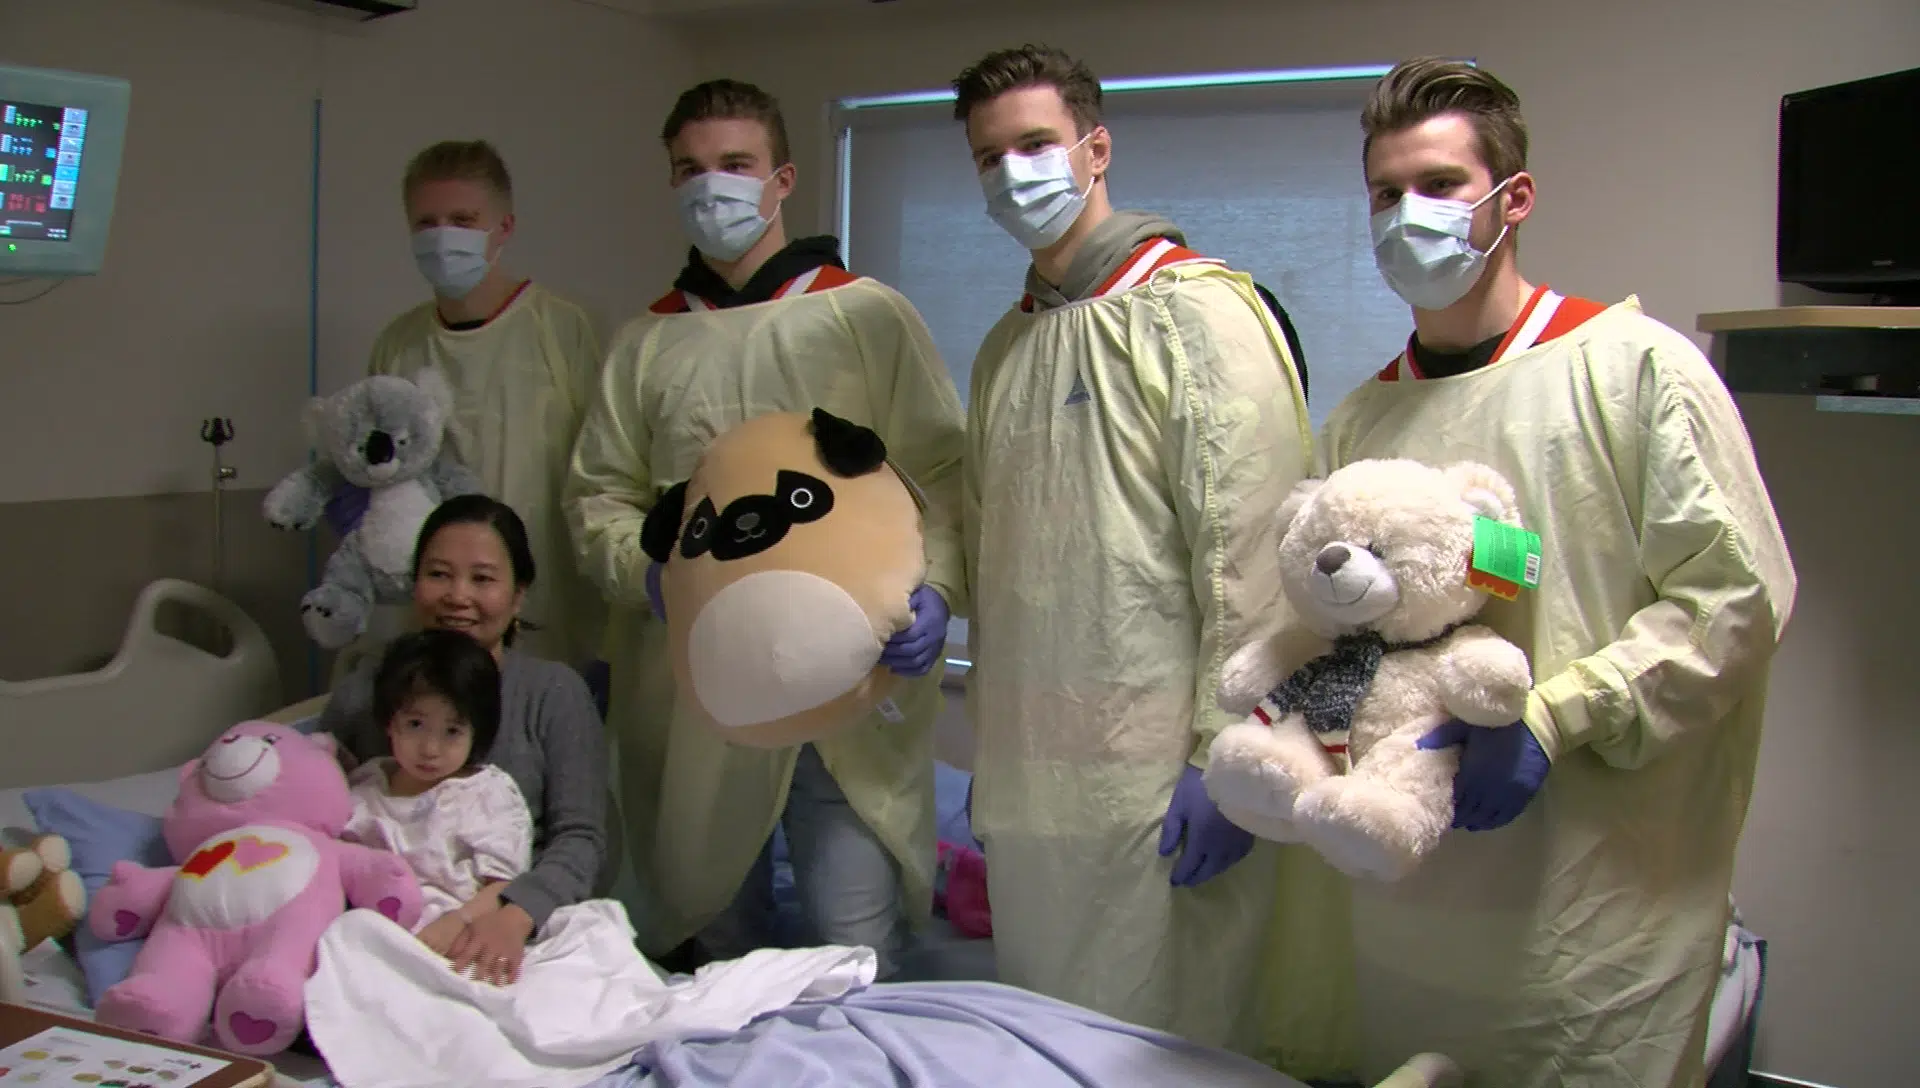 teddy bear delivery to hospital